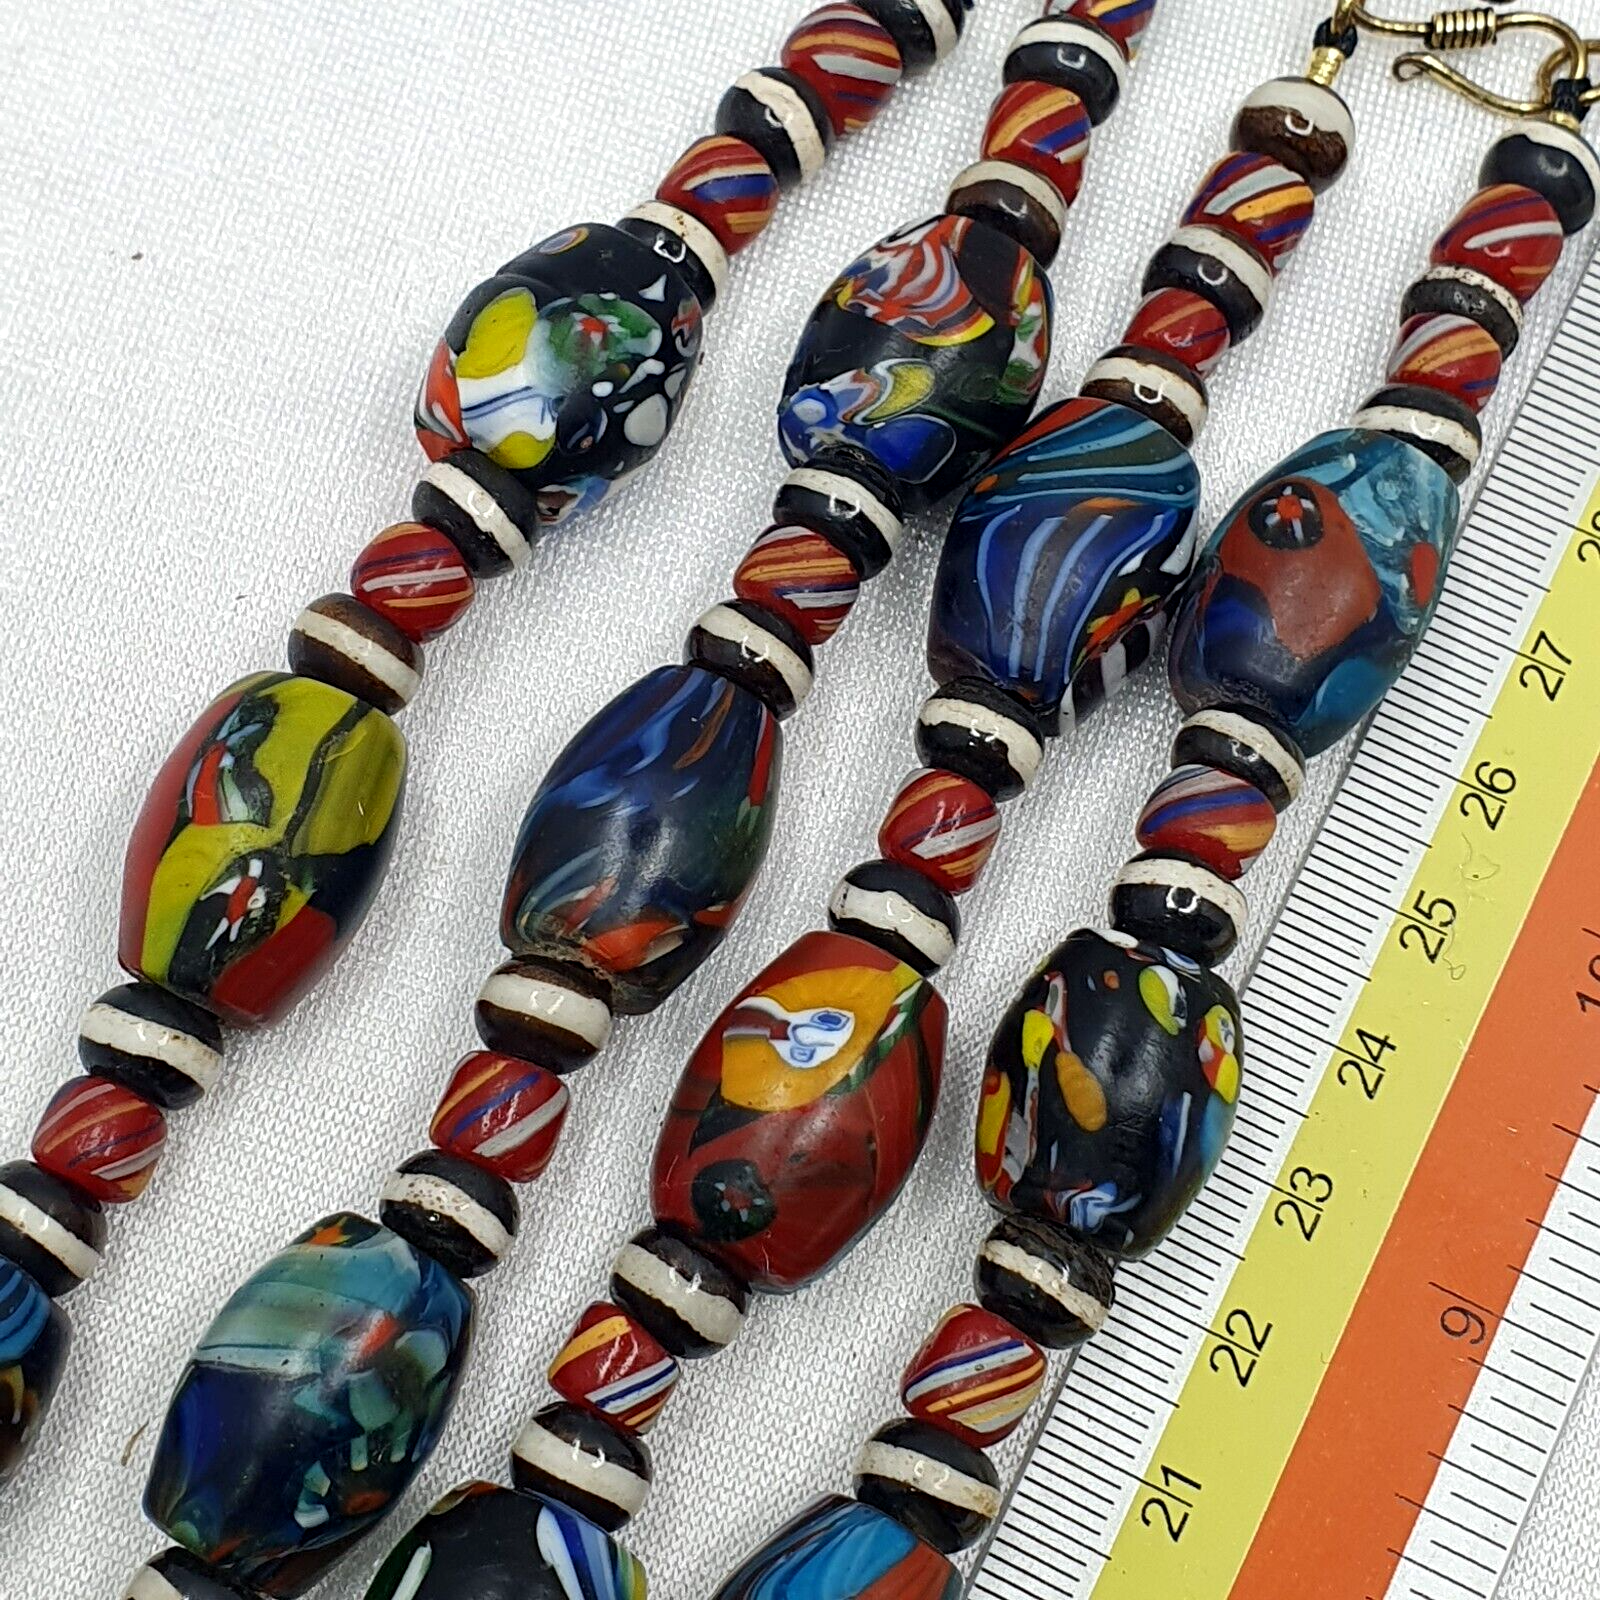 VINTAGE MILLEFIORI GLASS BEADS MURANO Style Beads NECKLACE